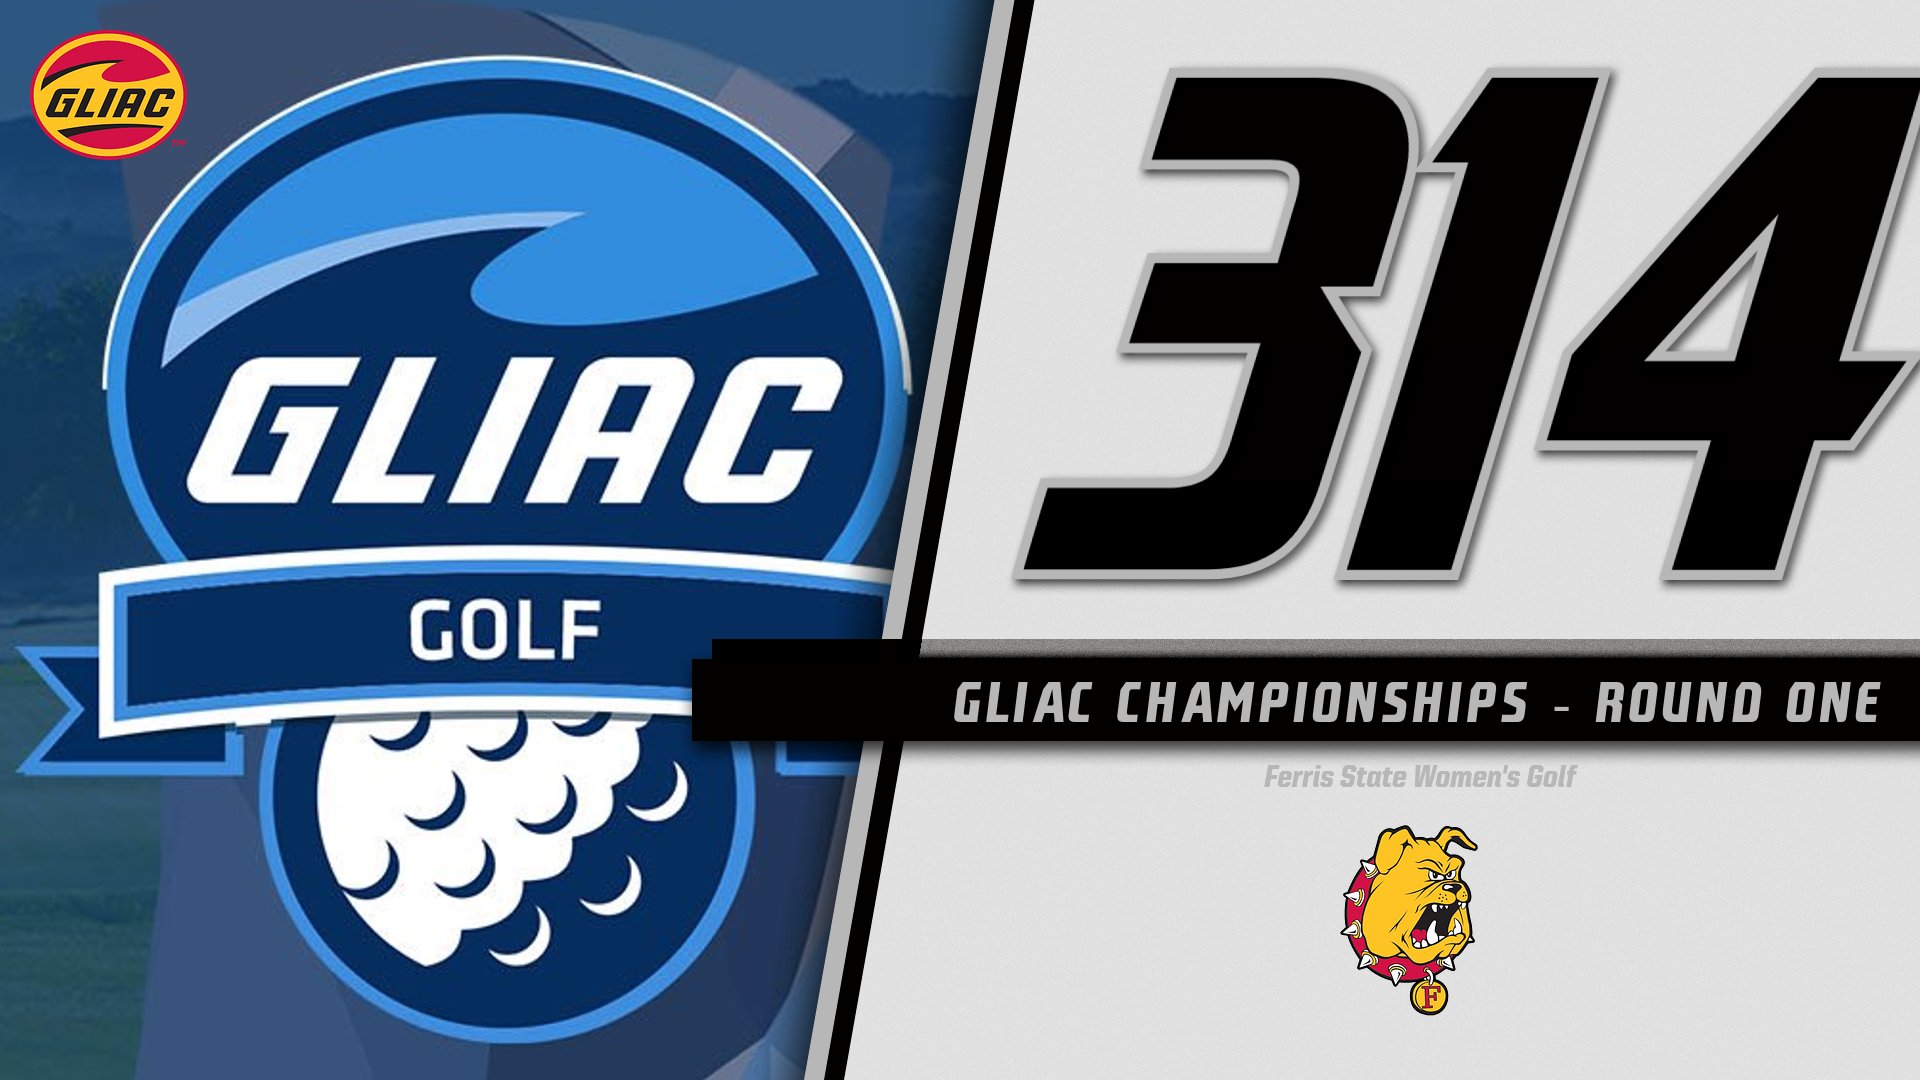 Ferris State Women's Golf Sixth In Competitive Field After First Round At GLIAC Championships